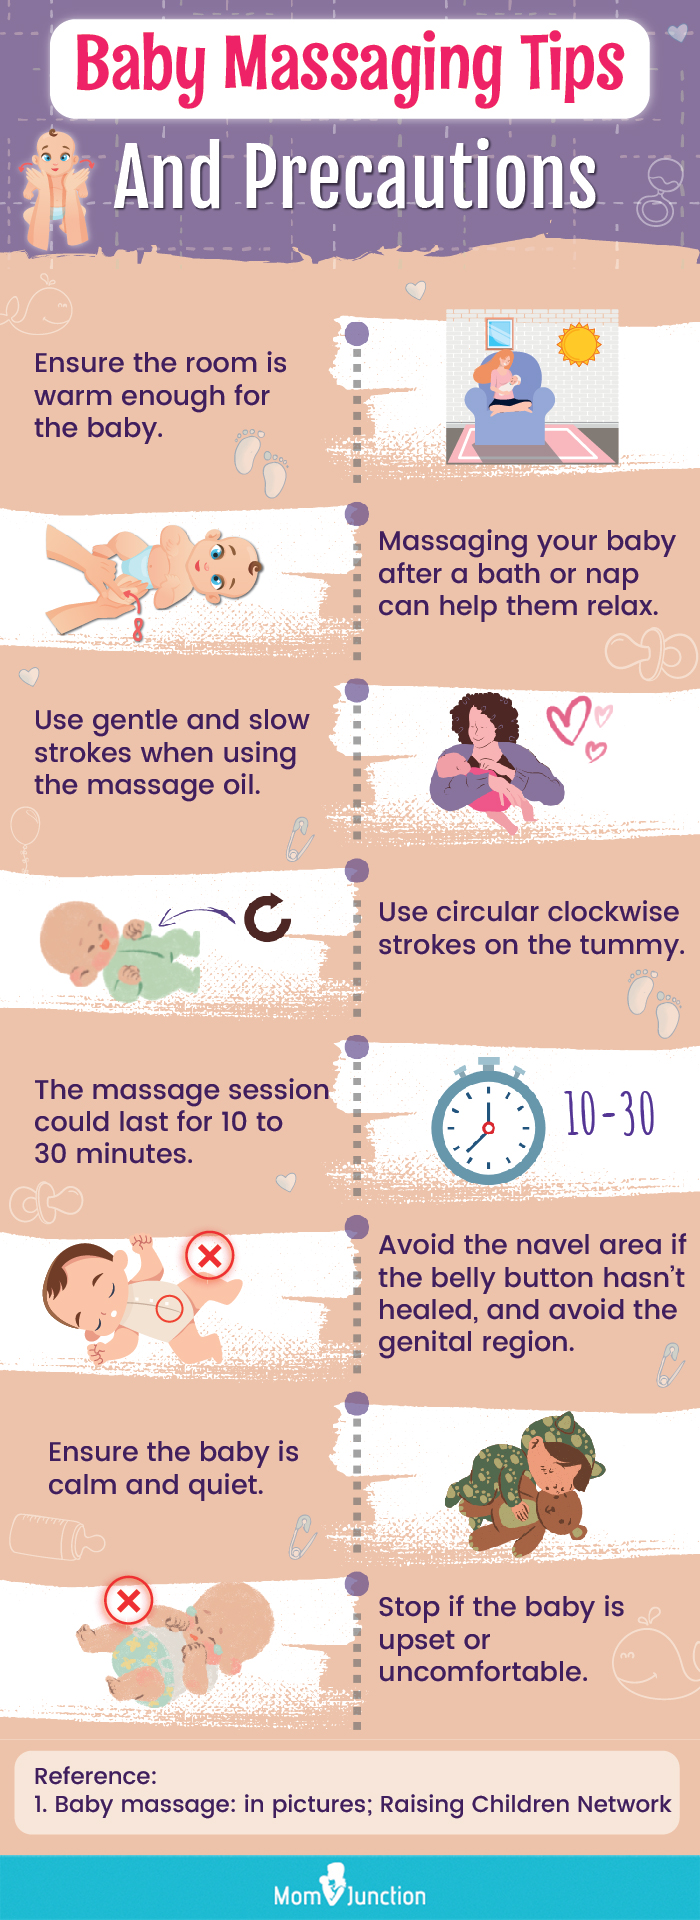 Baby Massaging Tips And Precautions (Infographic)